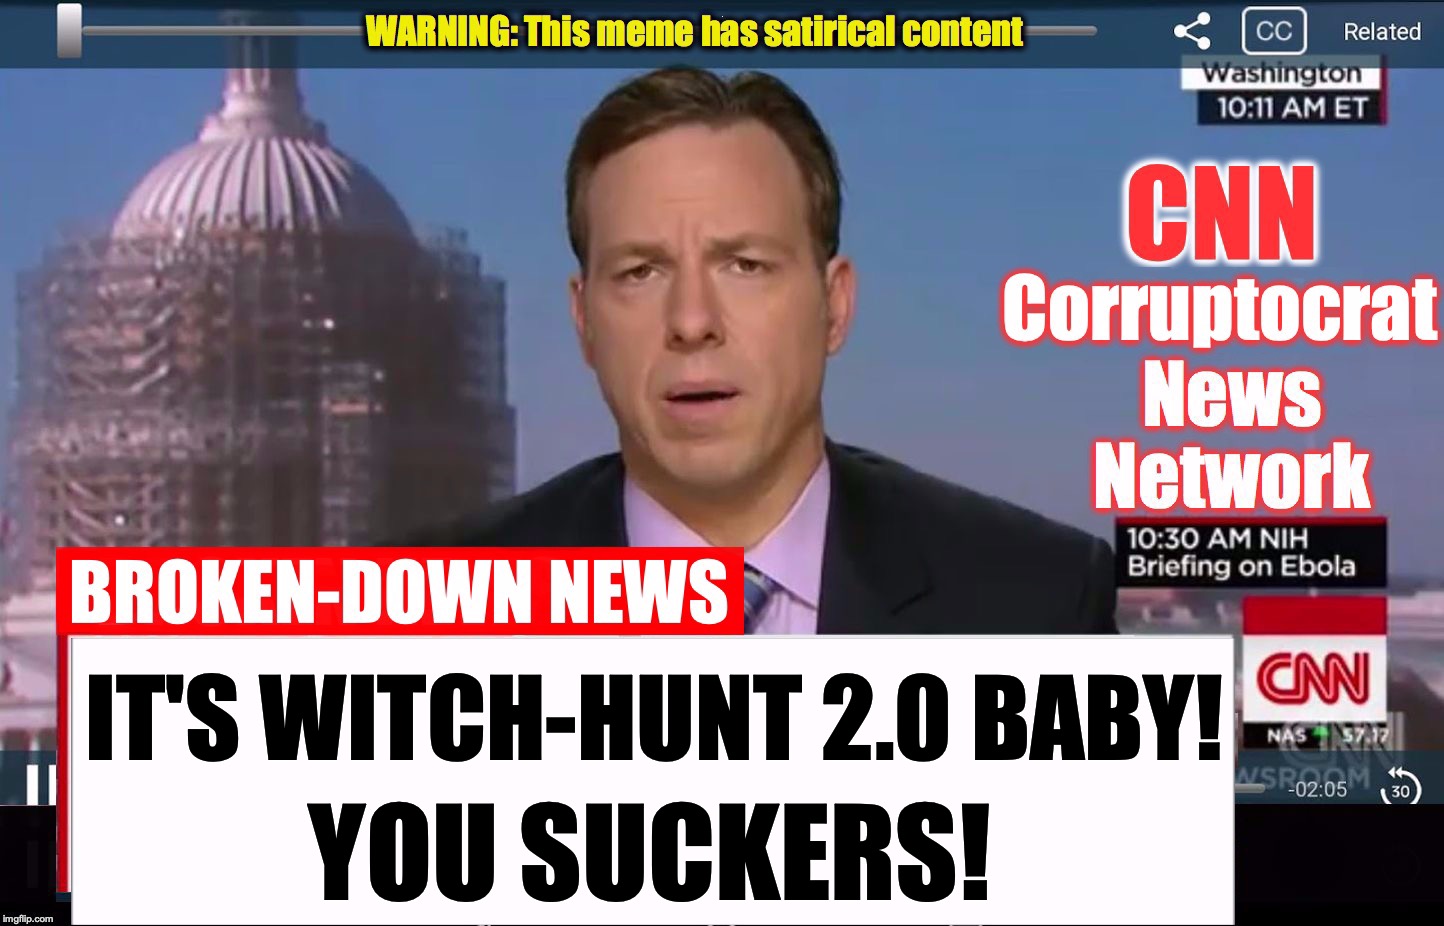 CNN Corruptocrat News Network | YOU SUCKERS! IT'S WITCH-HUNT 2.0 BABY! | image tagged in cnn corruptocrat news network | made w/ Imgflip meme maker